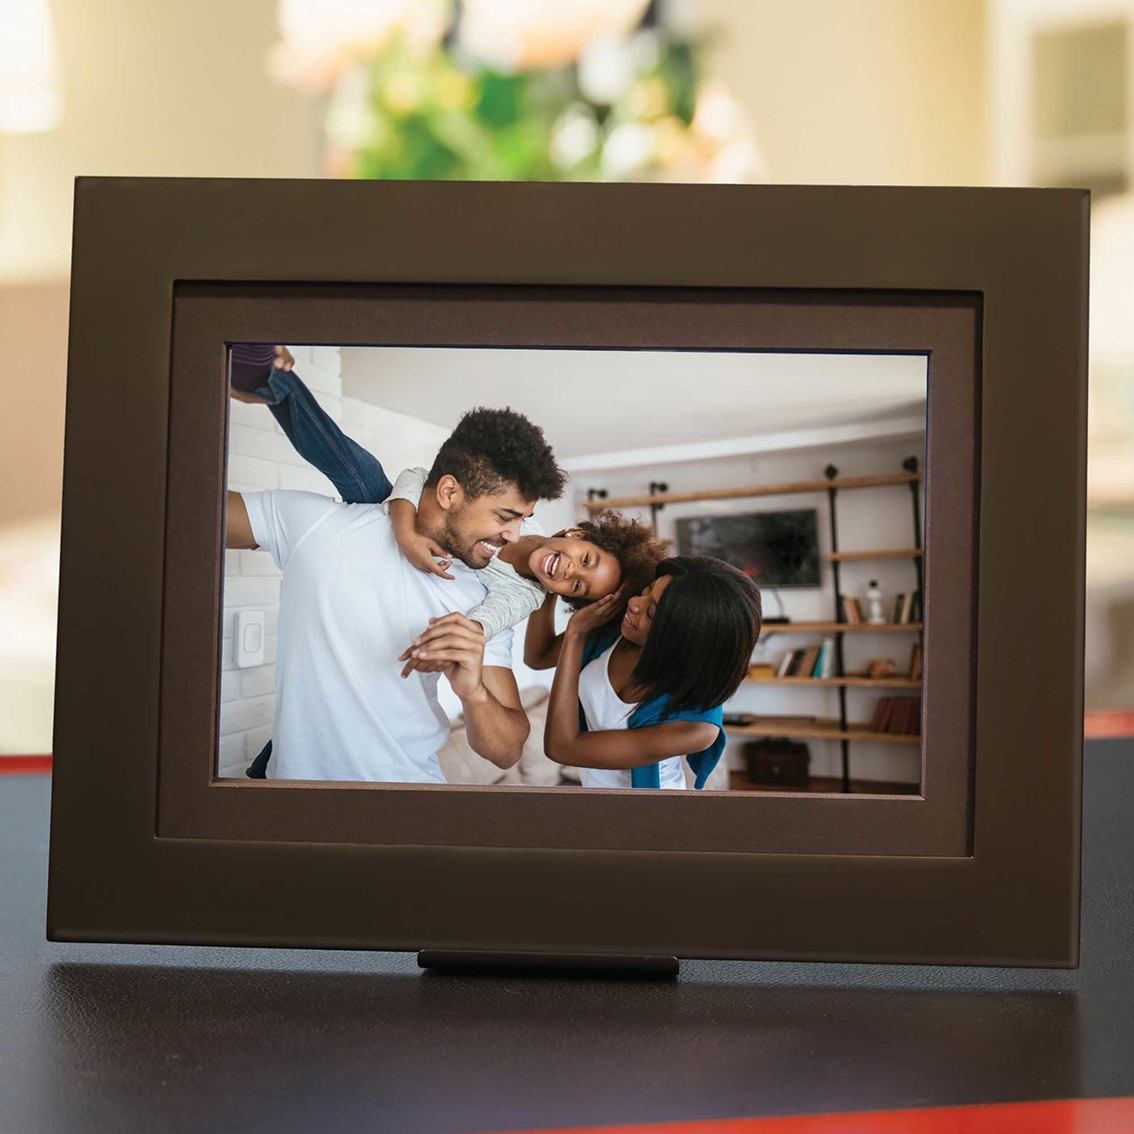 Brookstone 10.1-in. PhotoShare Friends and Family Cloud Frame - Image 7 of 9